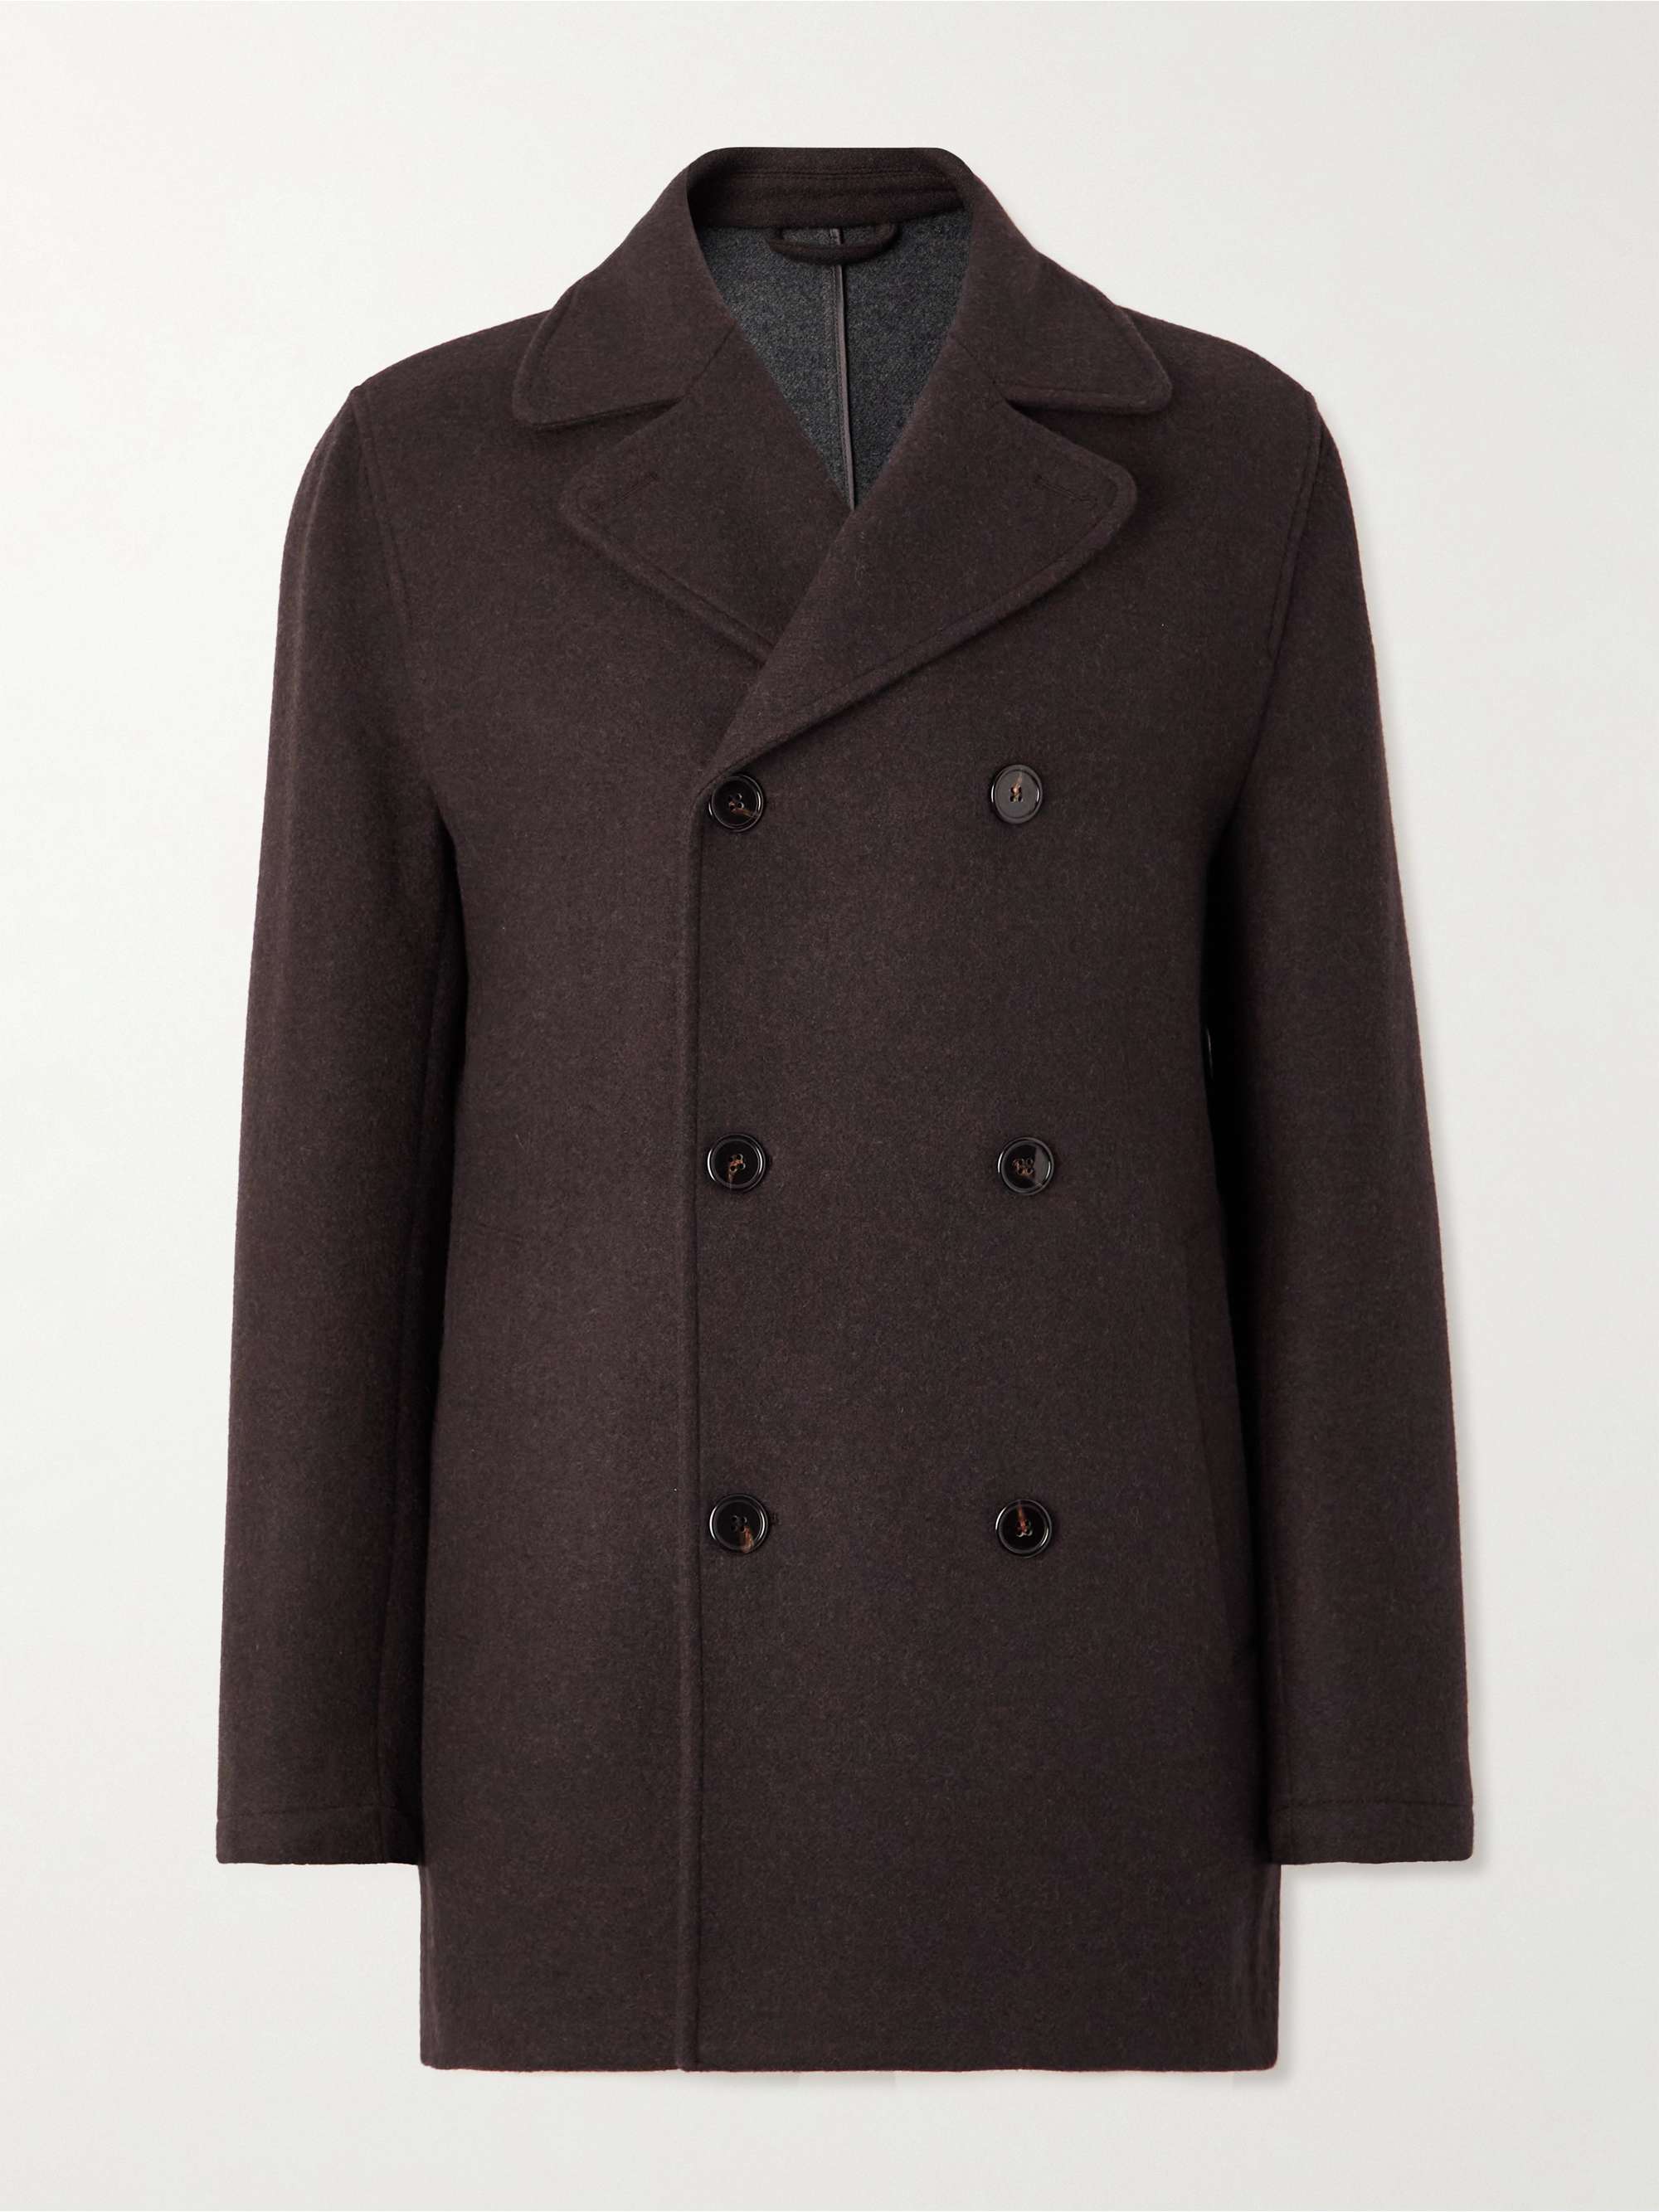 THOM SWEENEY Double-Breasted Wool Peacoat | MR PORTER